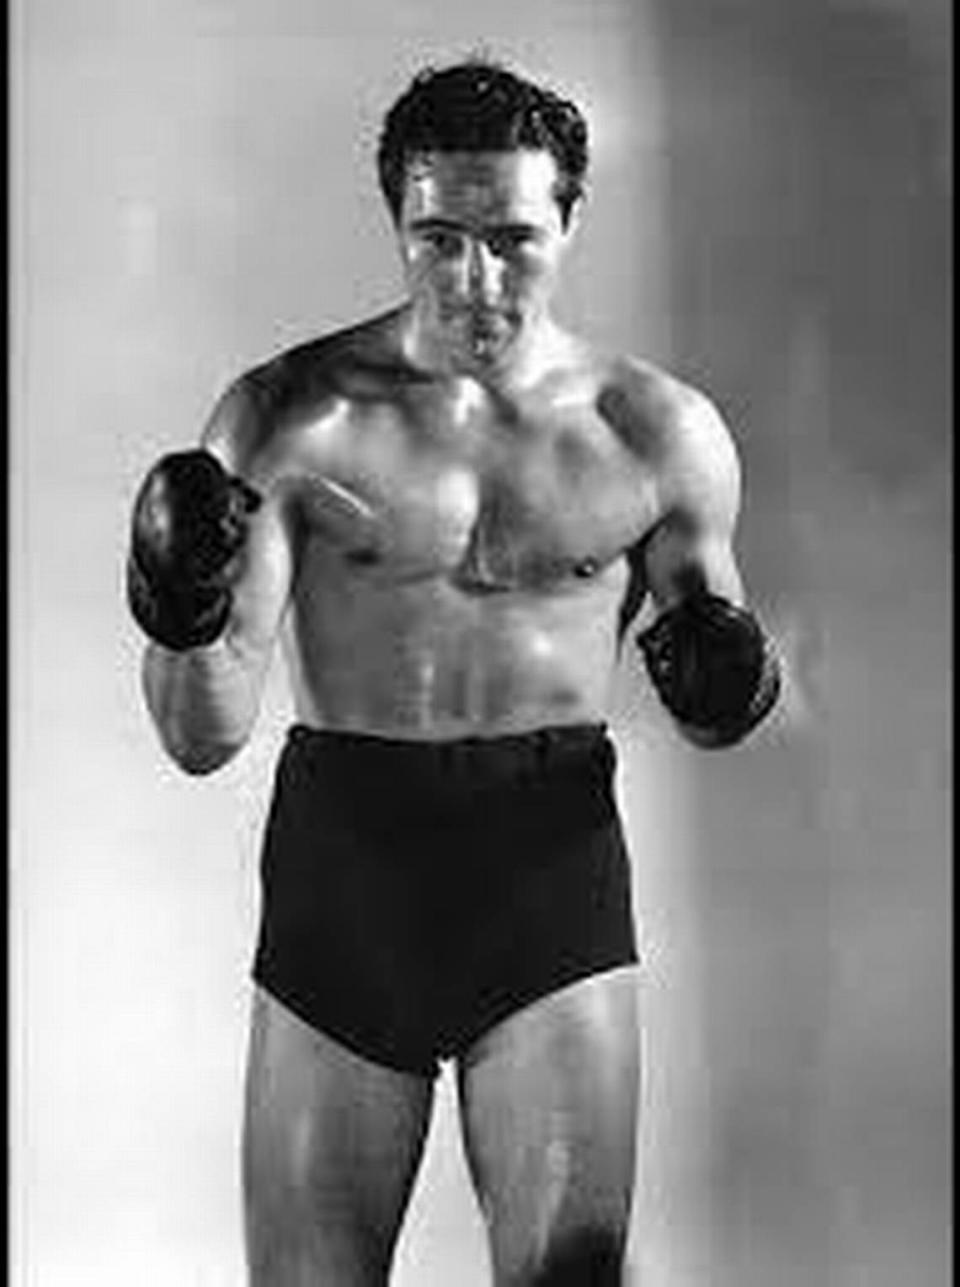 Former heavyweight boxing champ Max Baer was hired as a referee for pro wrestling events in an attempt to draw fans.